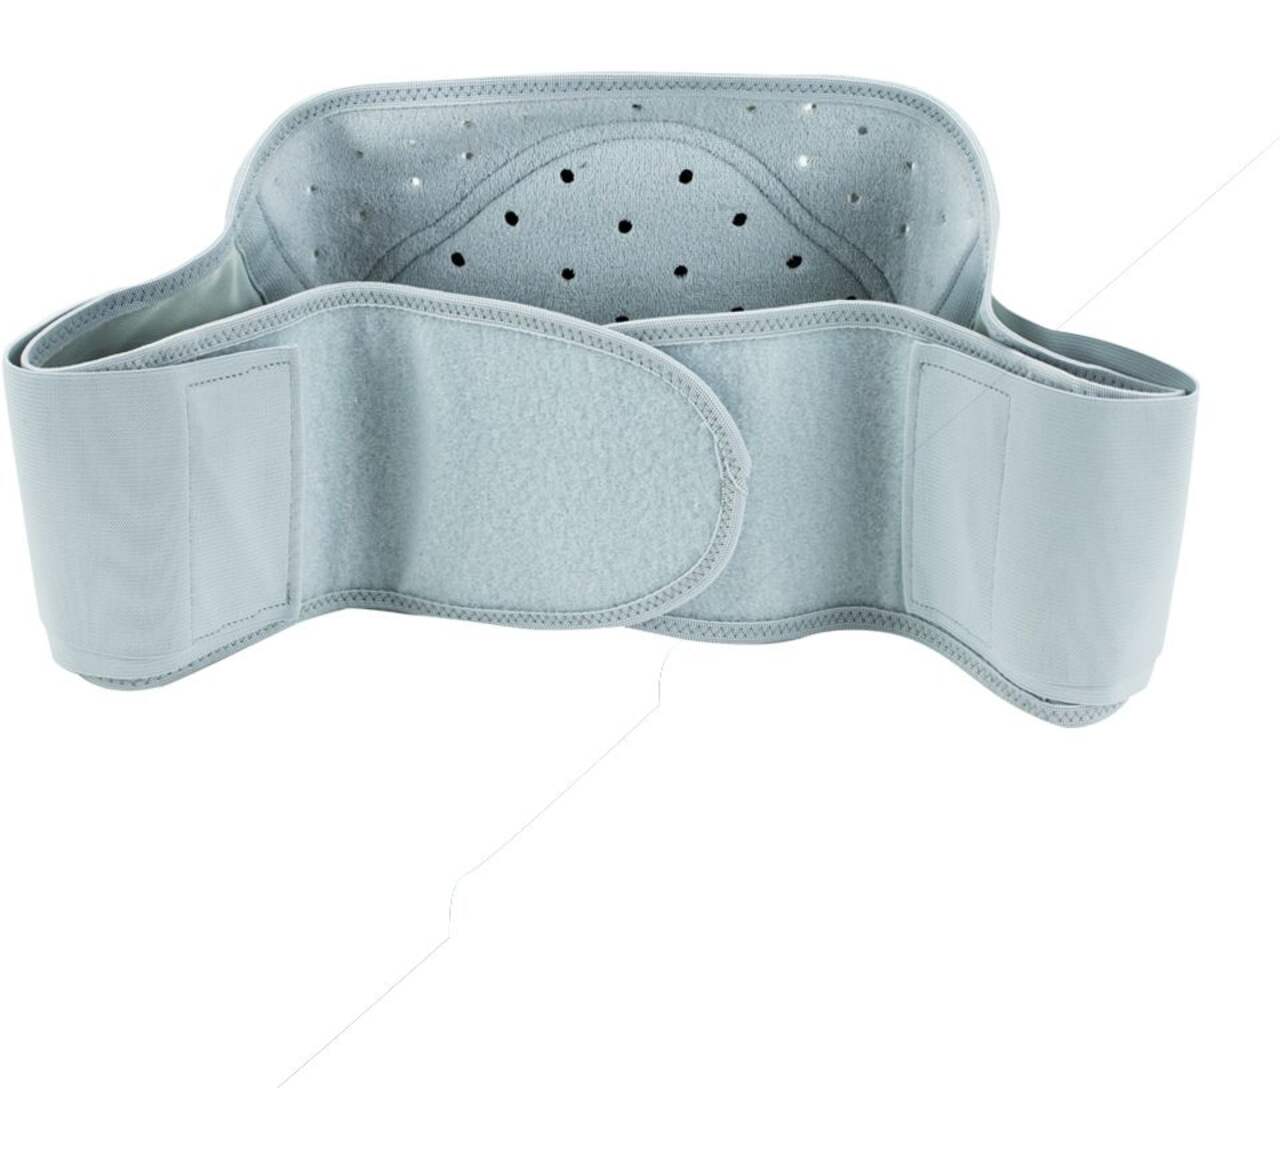 https://media-www.canadiantire.ca/product/living/personal-garment-care/personal-care/0746332/obusforme-women-s-support-belt-small-83aca8d1-1bfb-4b38-b222-af3e31c08c11-jpgrendition.jpg?imdensity=1&imwidth=640&impolicy=mZoom